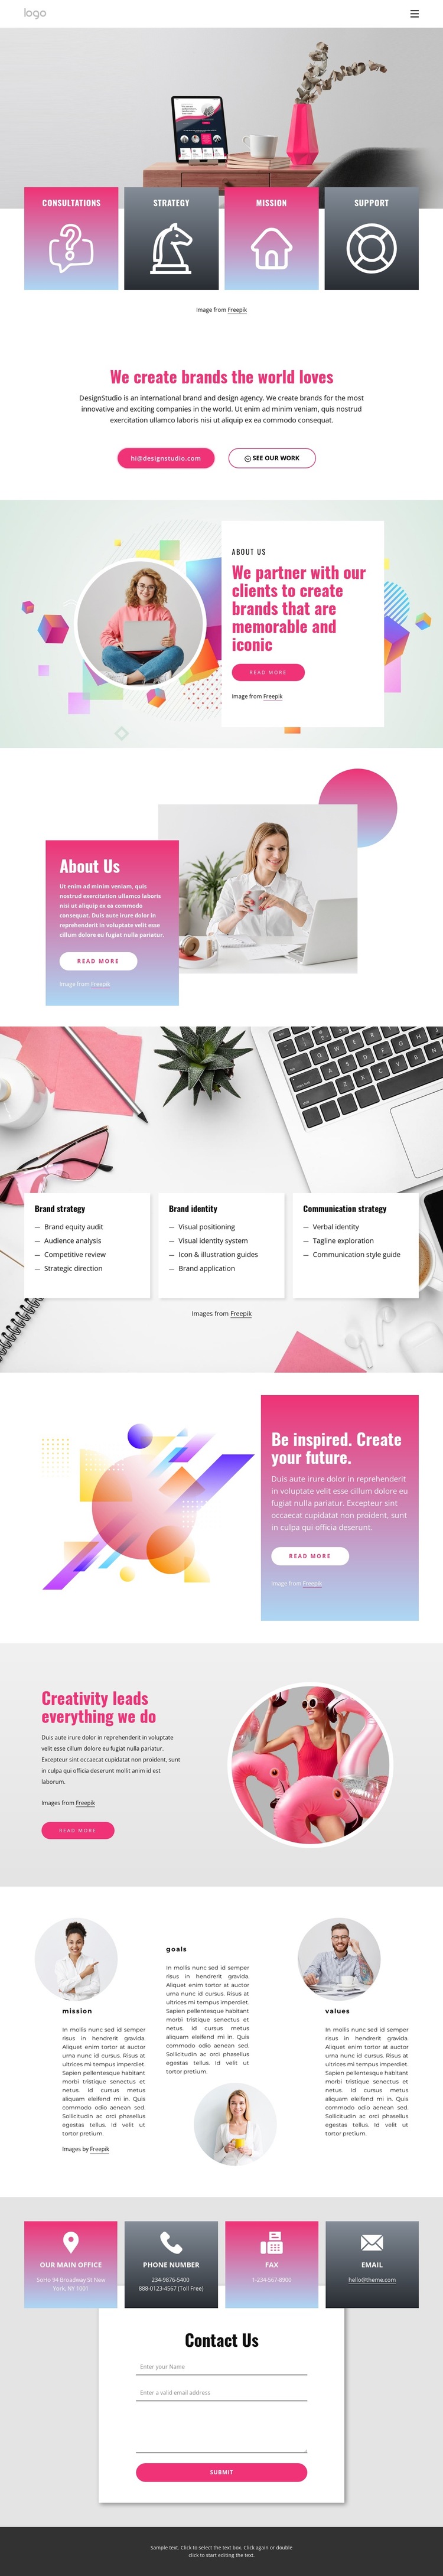 Creativity leads everything we do HTML5 Template